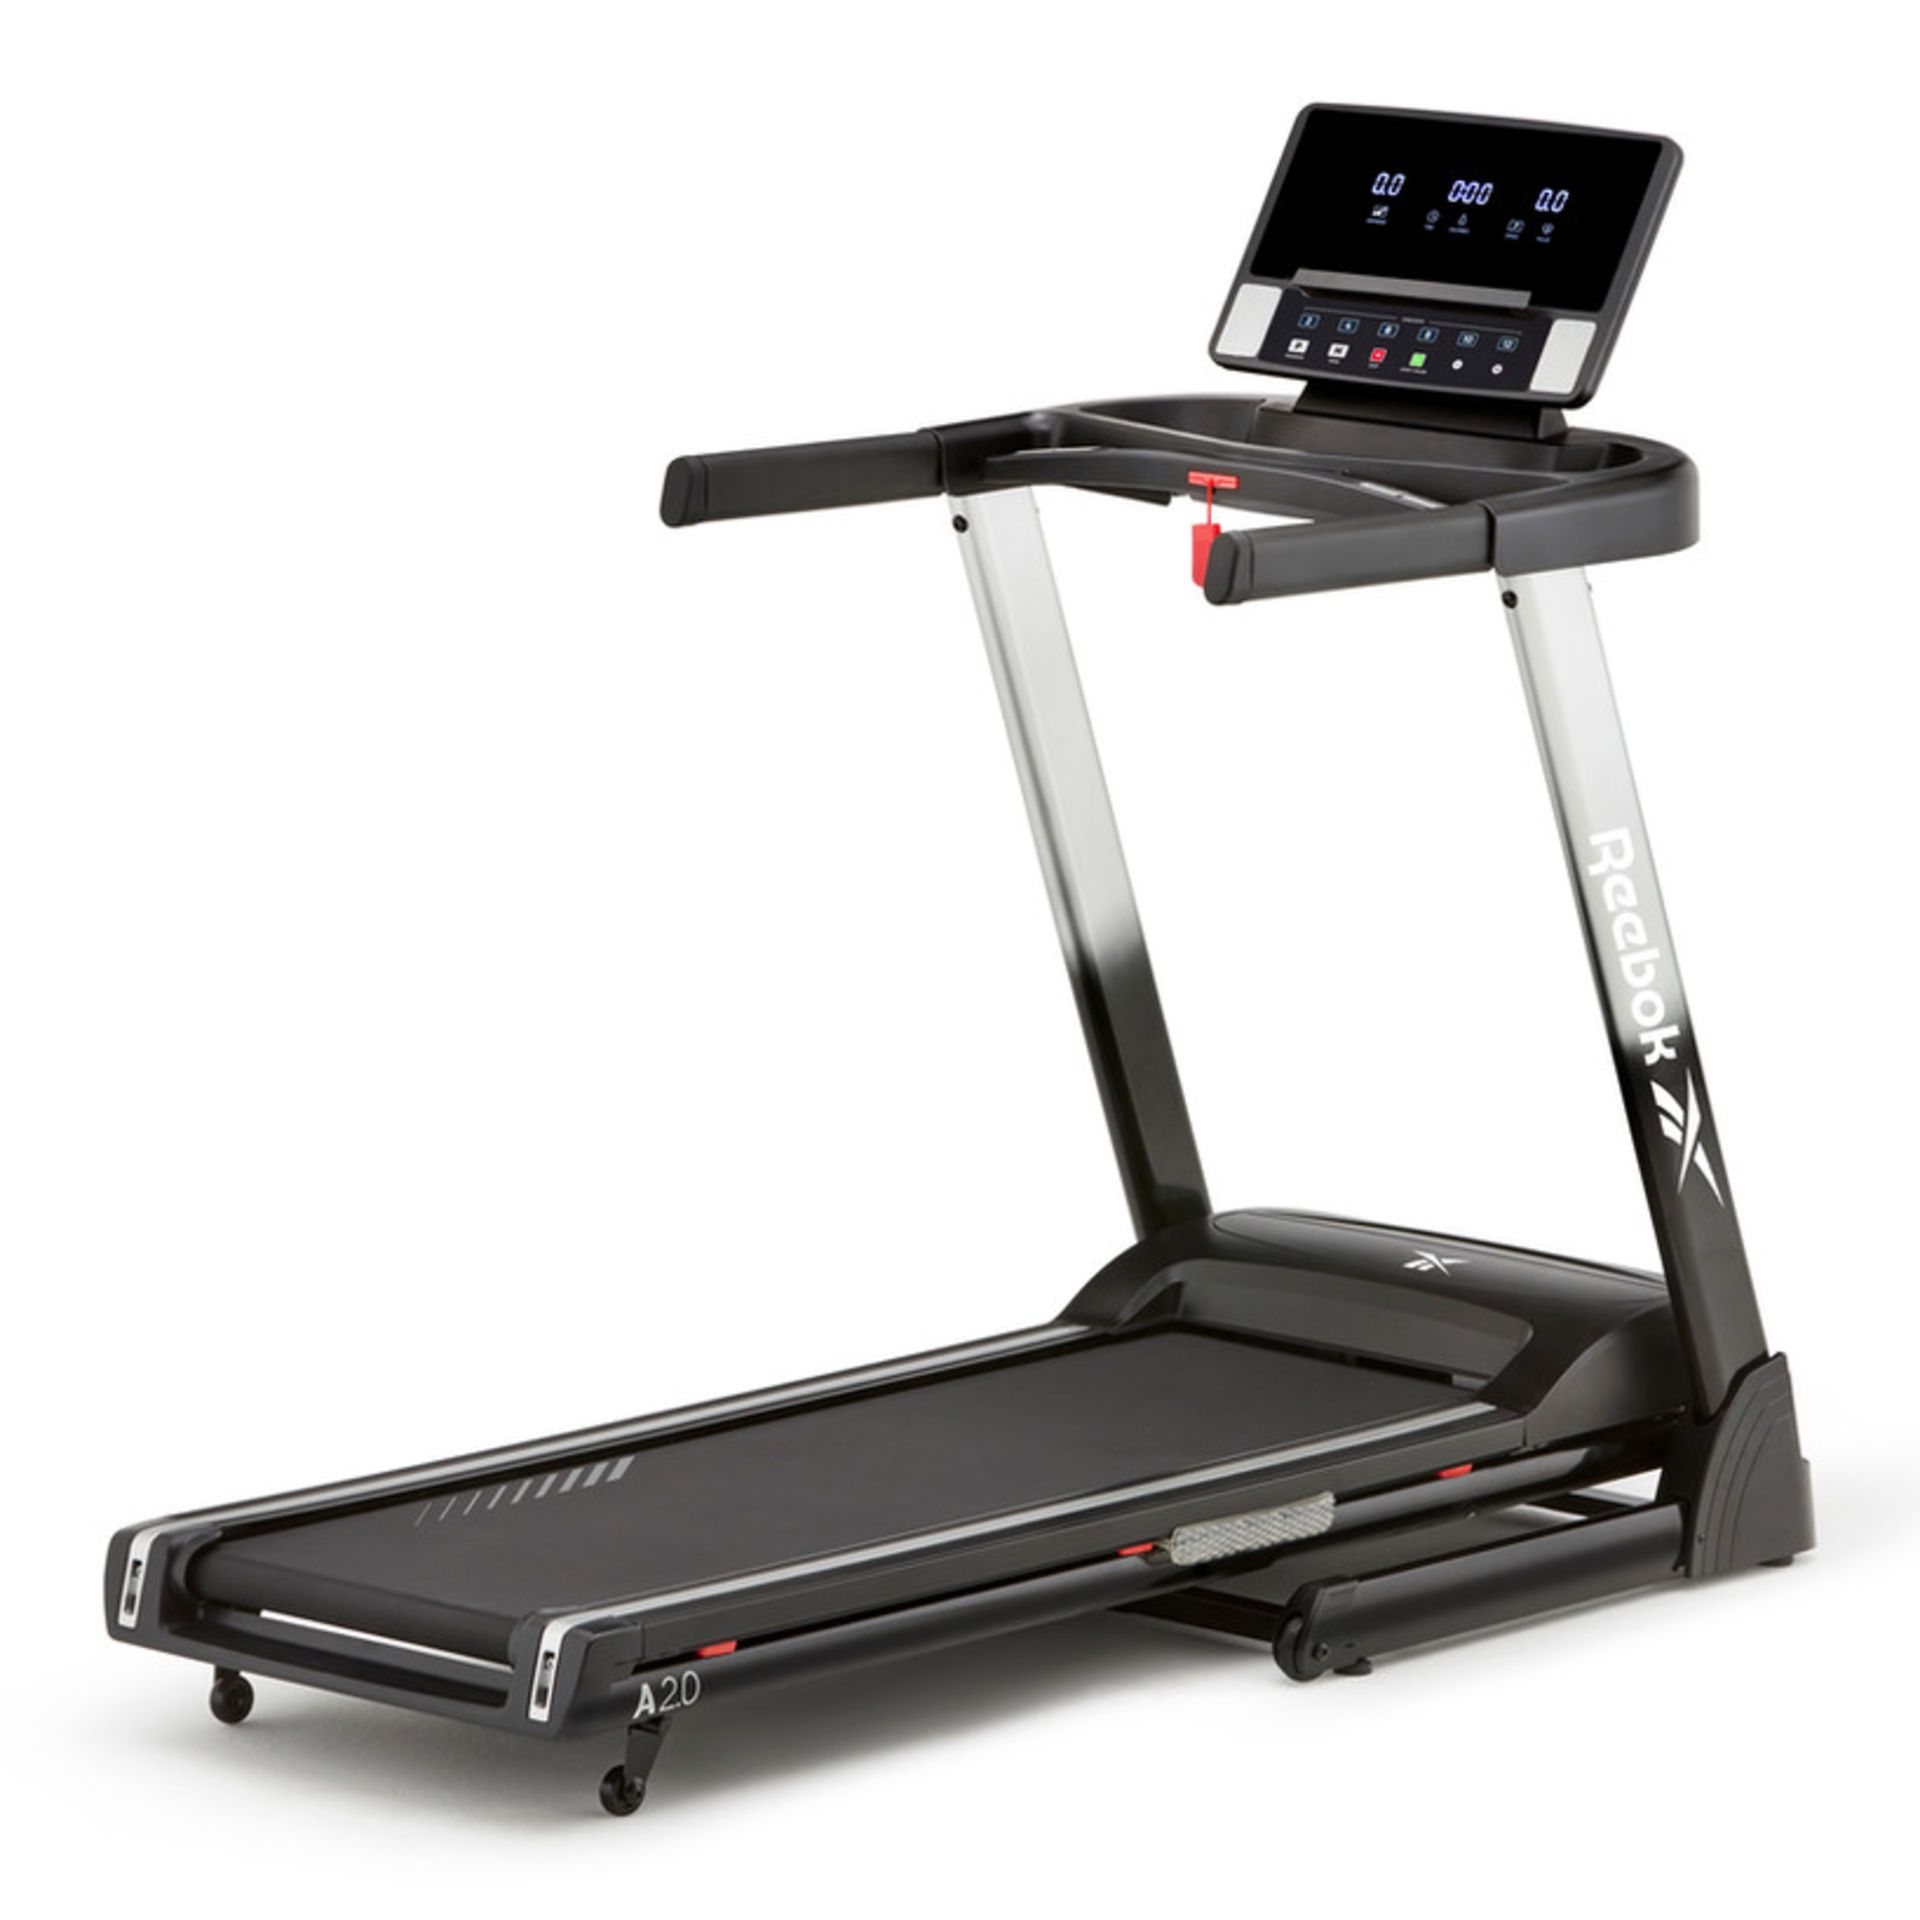 1 X BRAND NEW FACTORY SEALED REEBOK A2 TREADMILL 00 IN SILVER GROSS WEIGHT 75KG (NOTE BOX SLIGHTLY